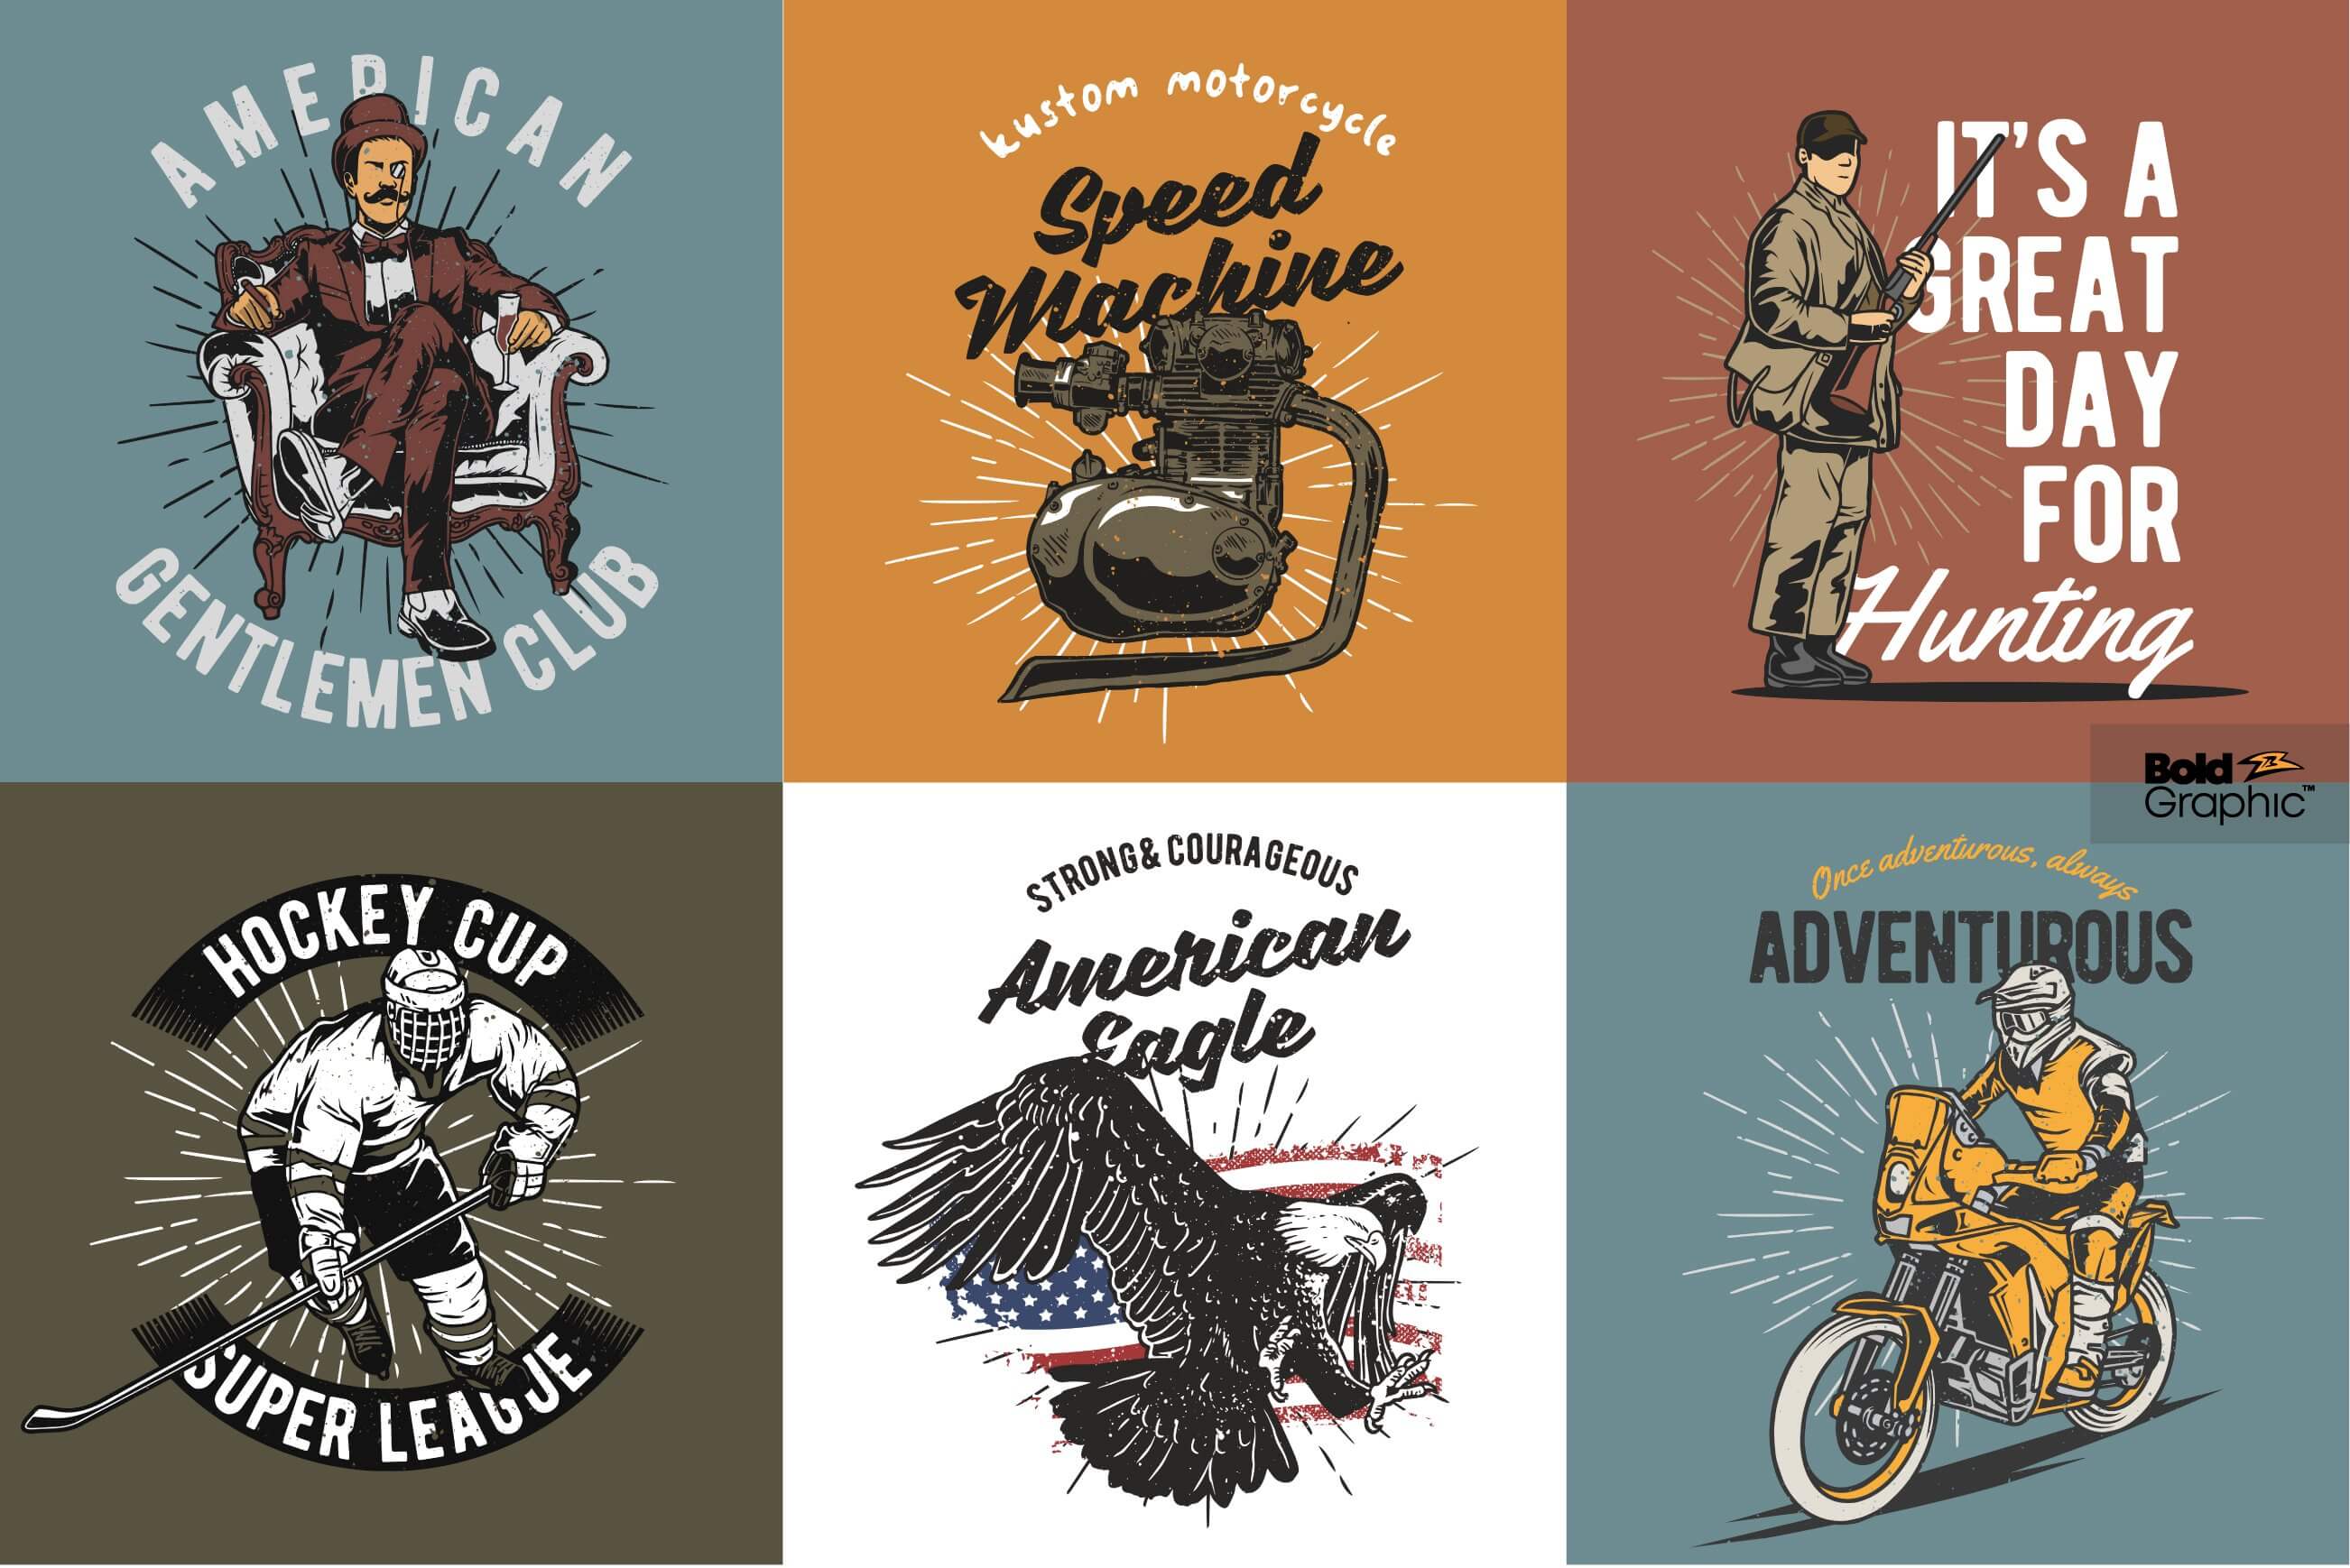 T-shirt designs with vintage images and inscriptions "American gentleman's club", "American eagle" and more.